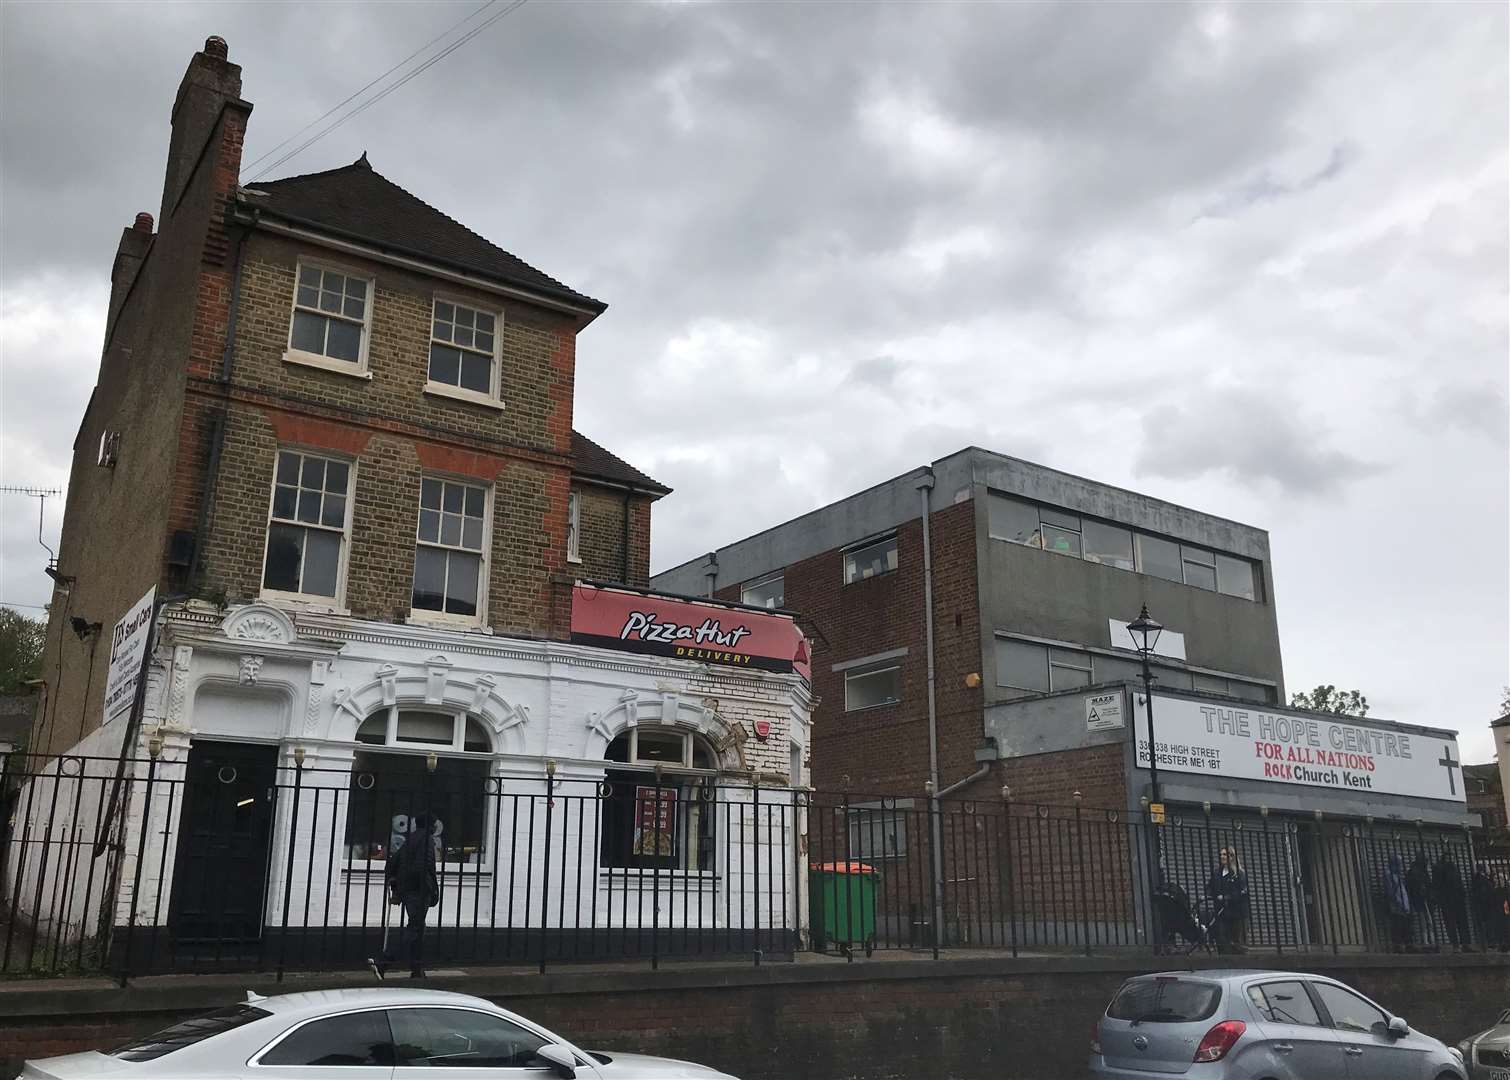 The site, 320 to 346 High Street, Rochester, includes the Thai Market, the Pizza Hut which was formerly a pub and The Flippin’ Frog micro pub - however the demolition of these buildings are not included in the plans